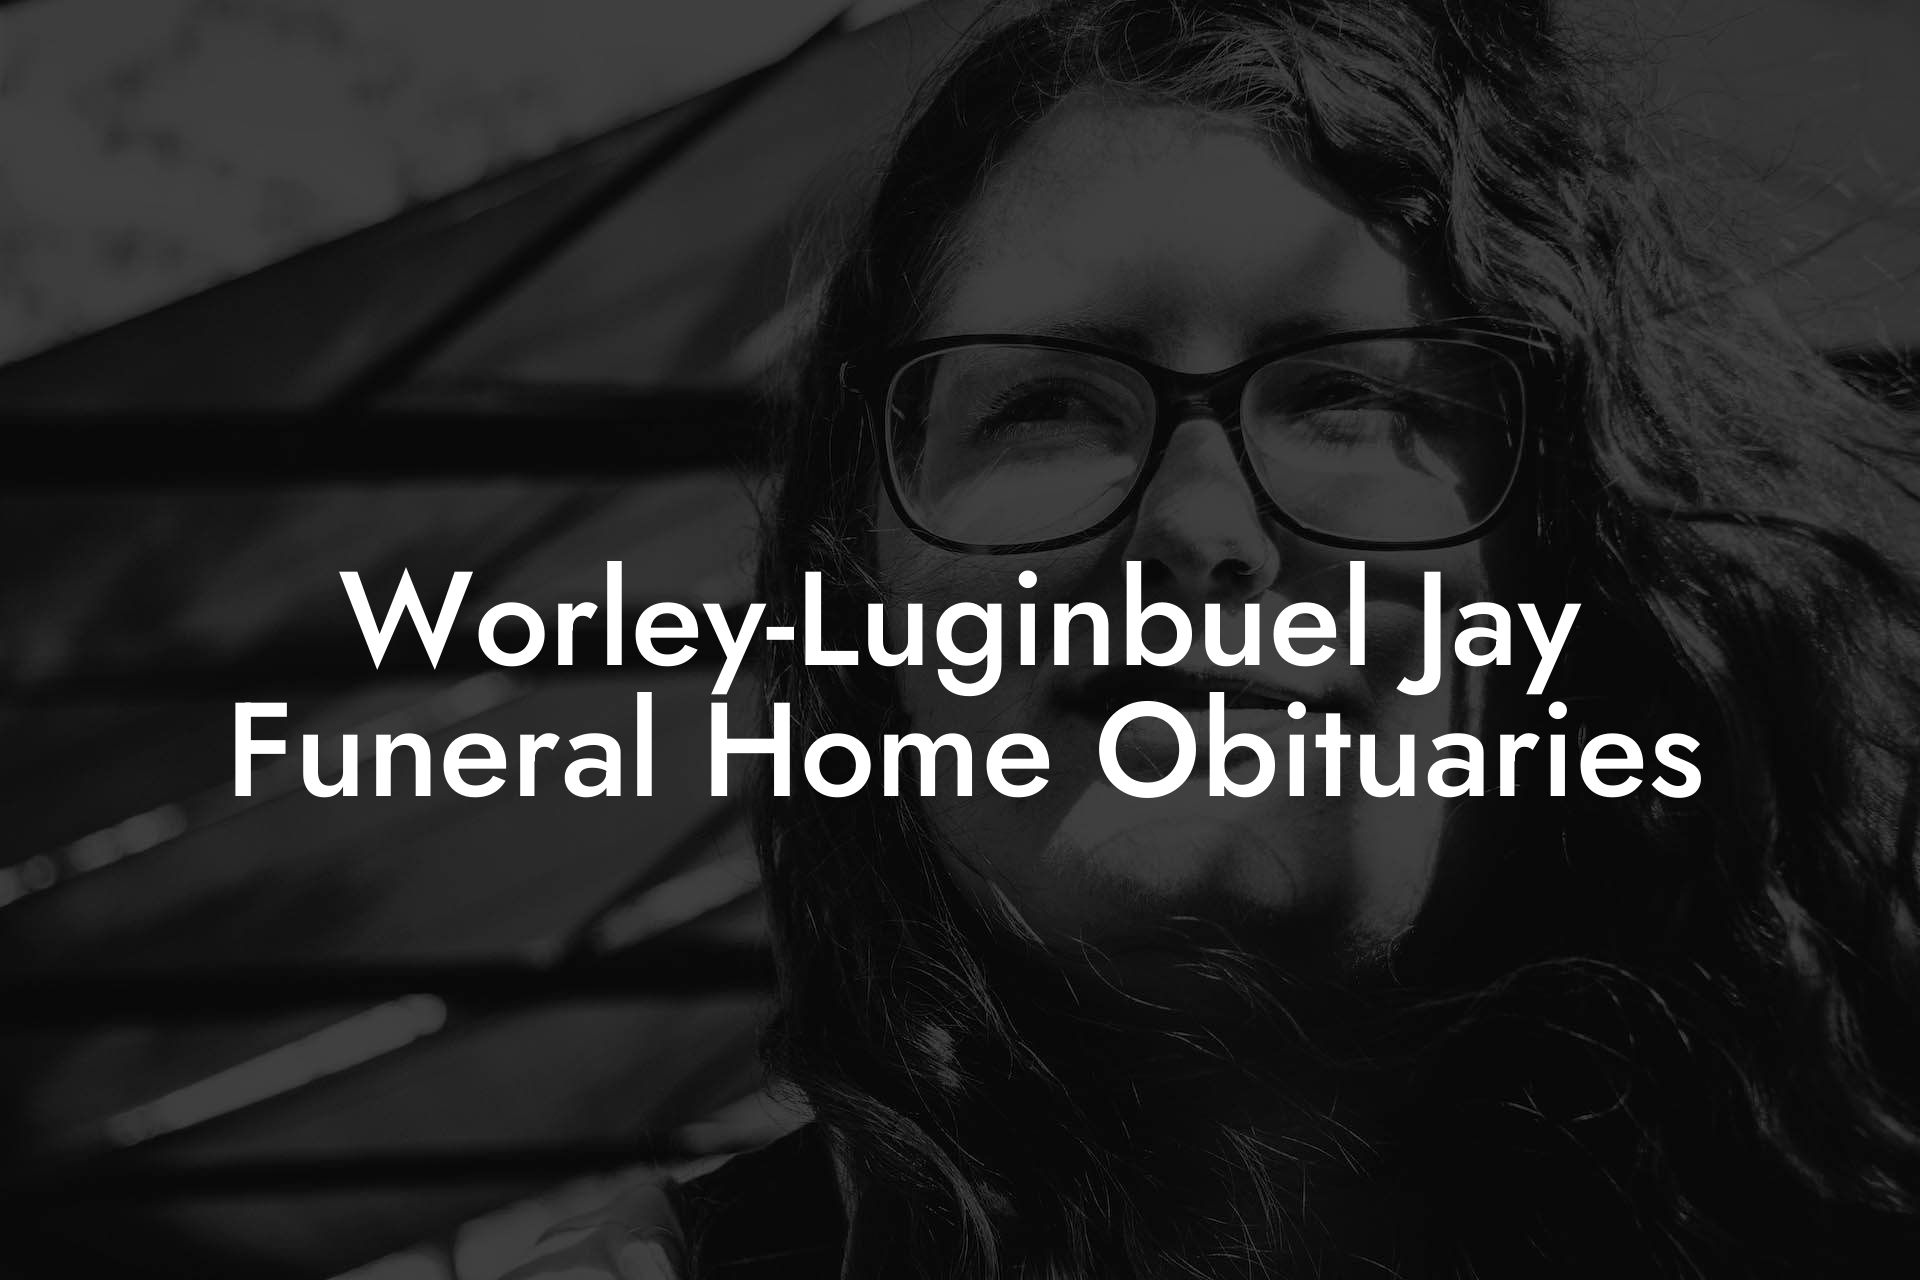 Worley-Luginbuel Jay Funeral Home Obituaries